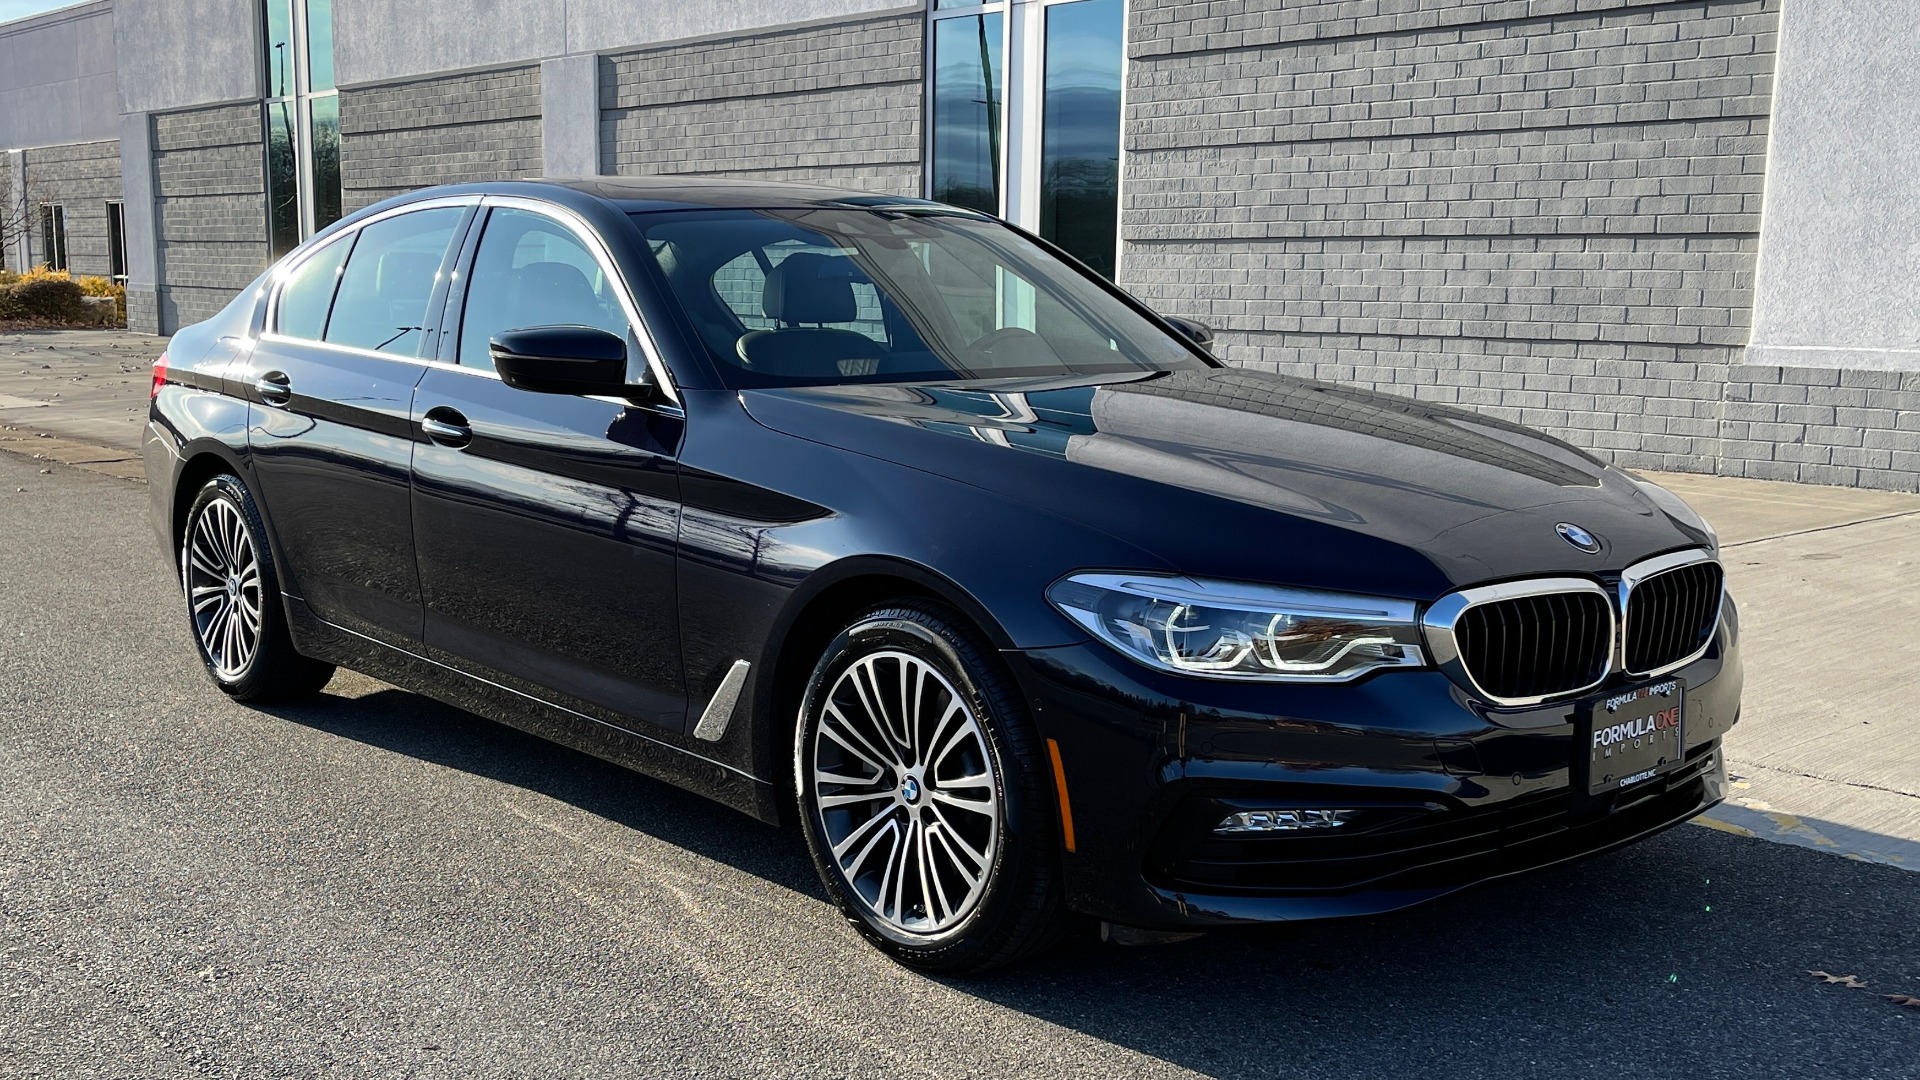 Used 2018 BMW 5 SERIES 530I XDRIVE PREMIUM / EXEC PKG / DRVR ASST PLUS / NAV / REARVIEW for sale Sold at Formula Imports in Charlotte NC 28227 8